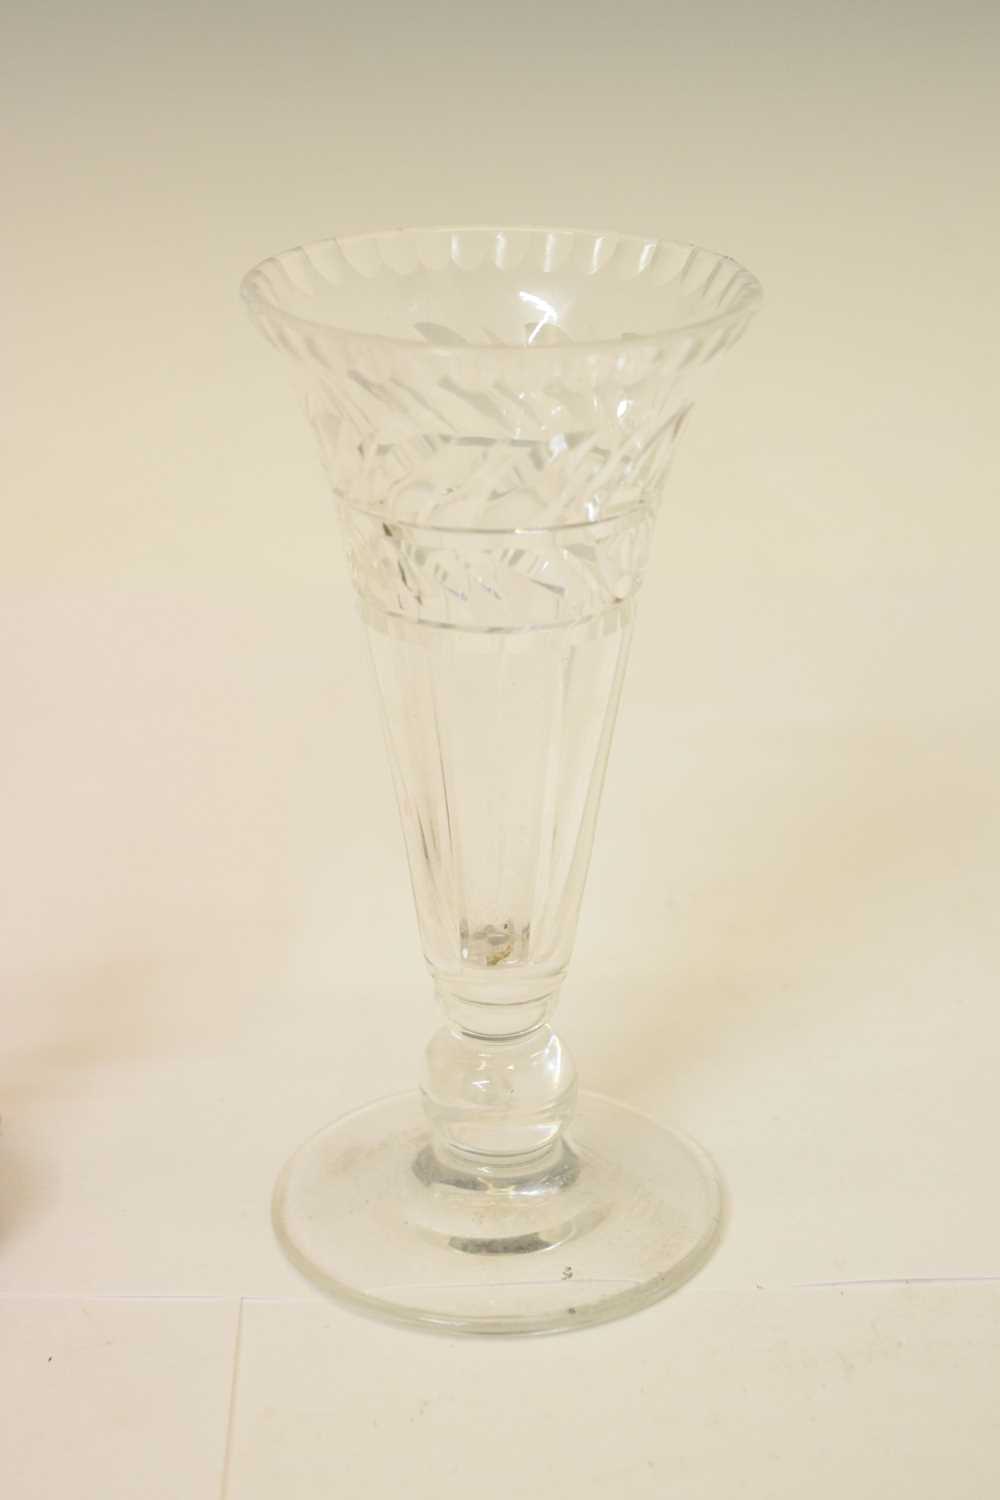 19th century epergne and cut glass vase - Image 6 of 9